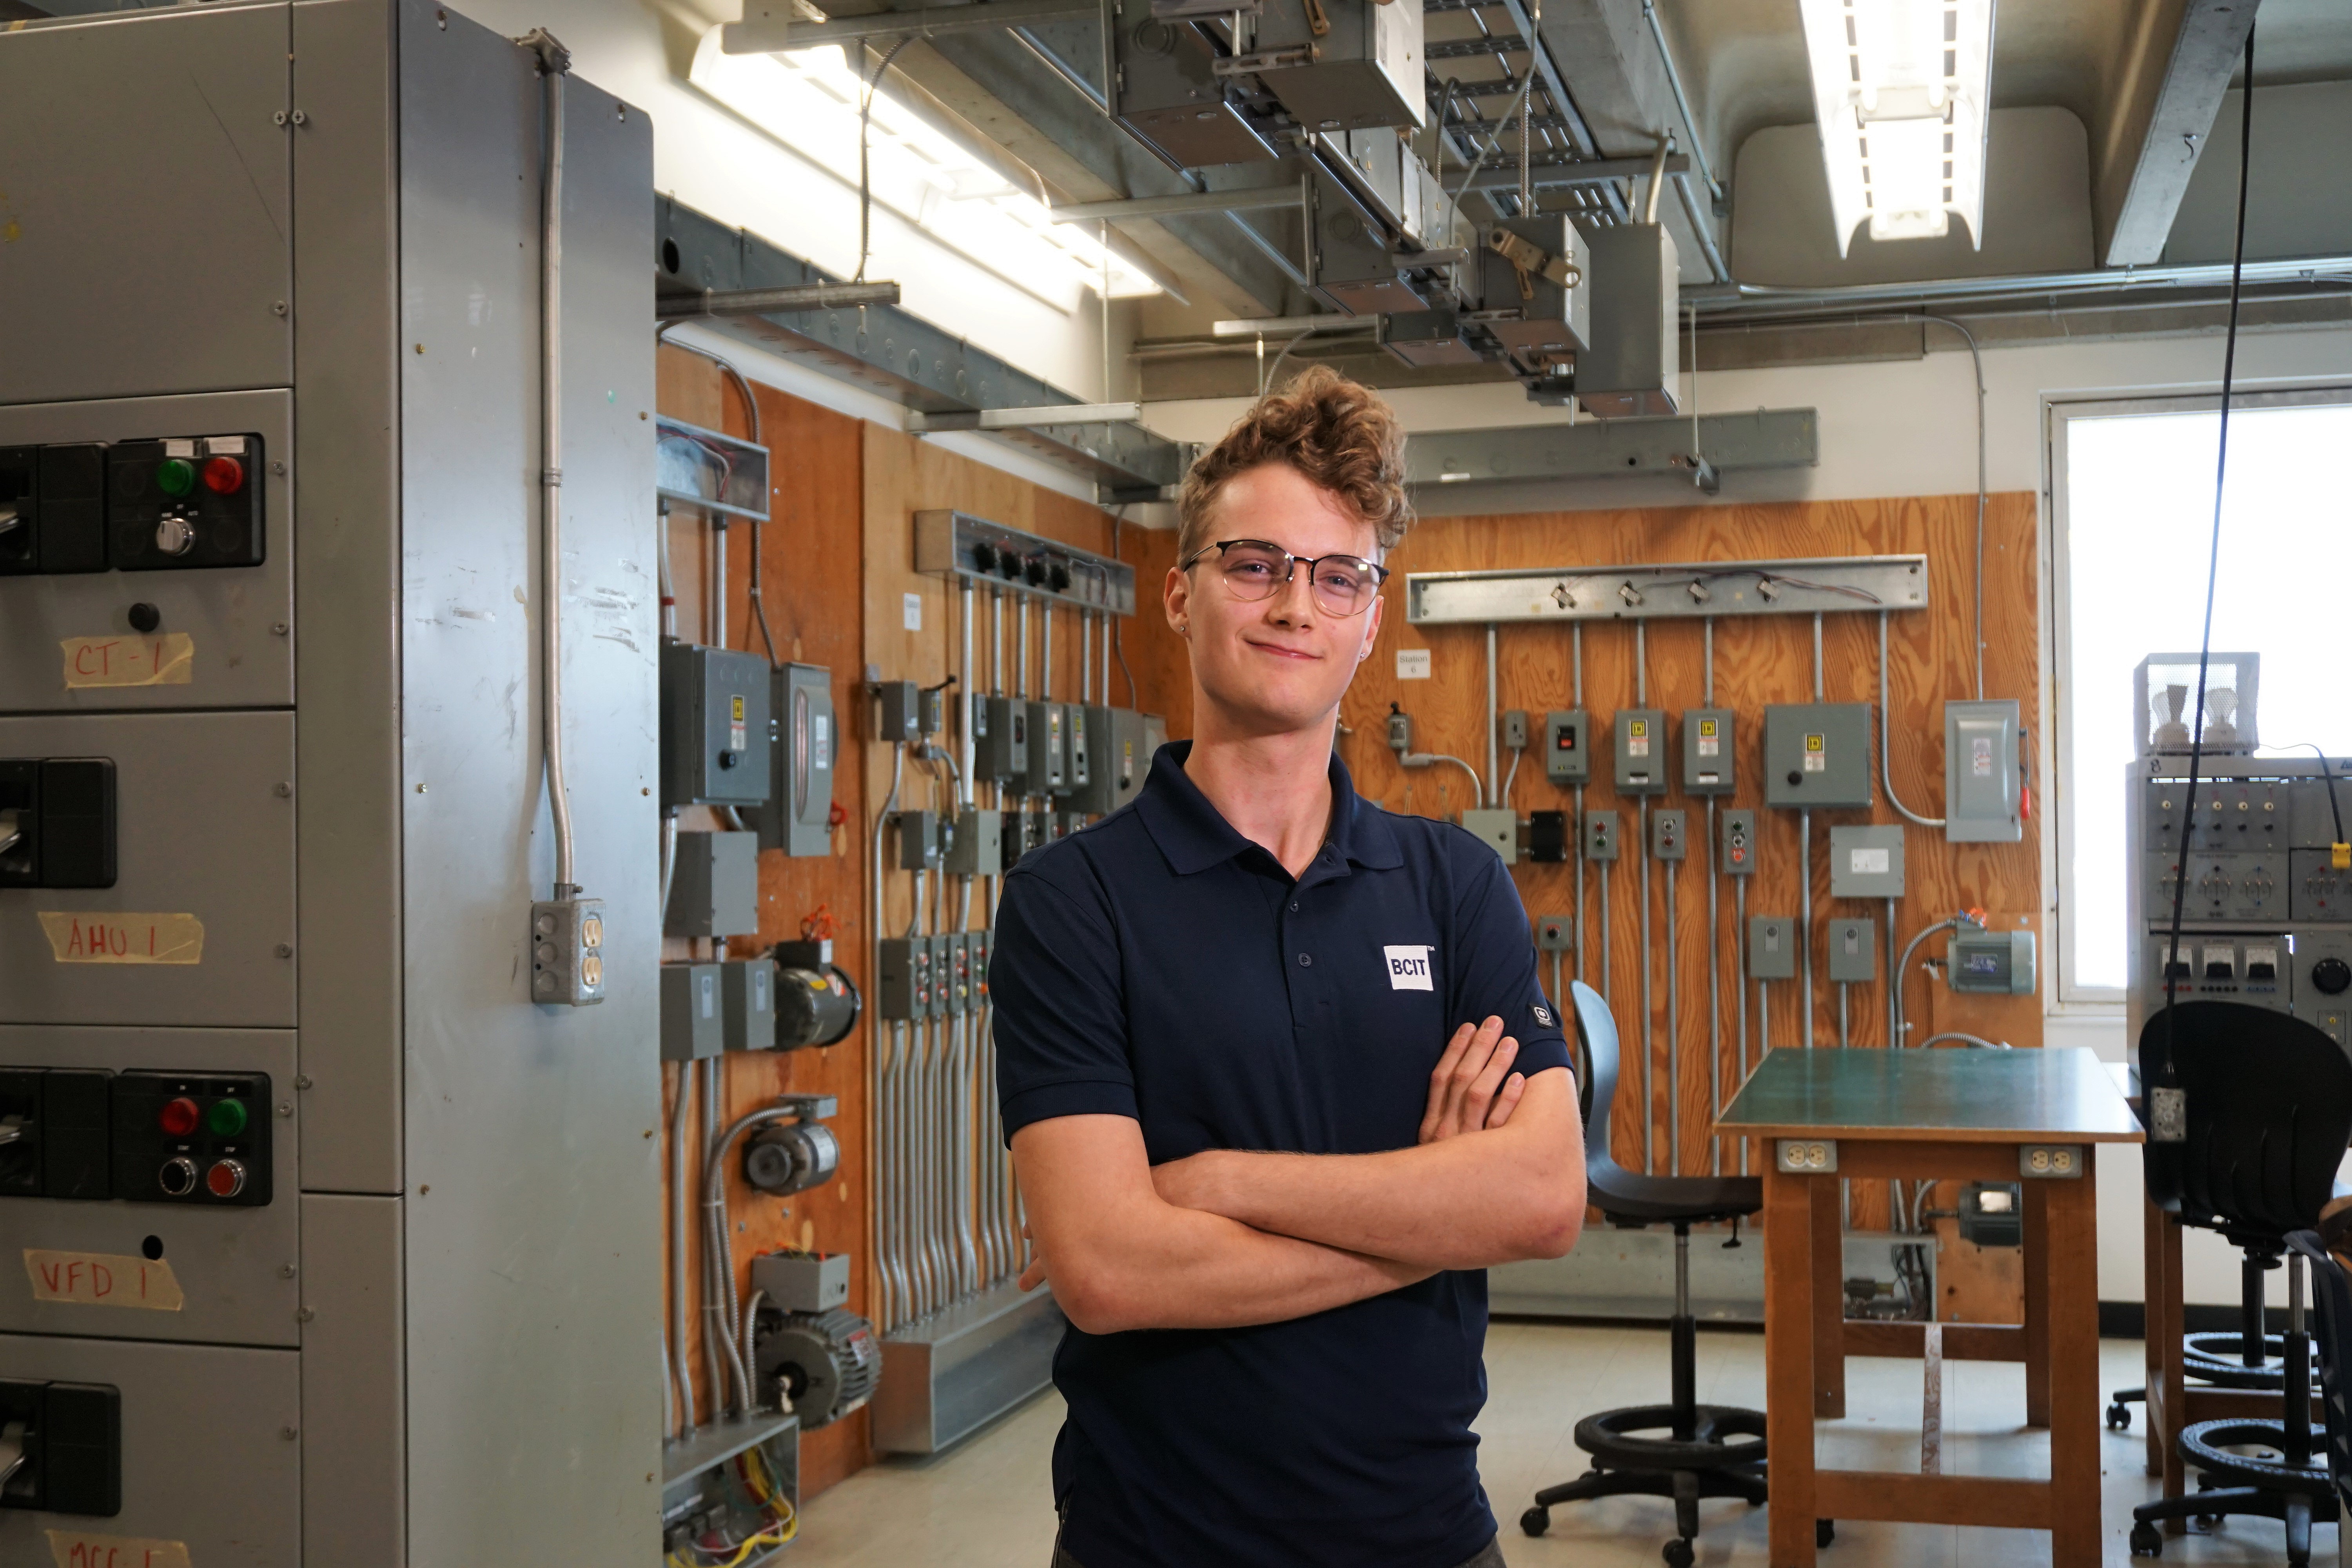 BCIT-Caleb Showers-Cornell, Electrical Apprentice Level 2 02